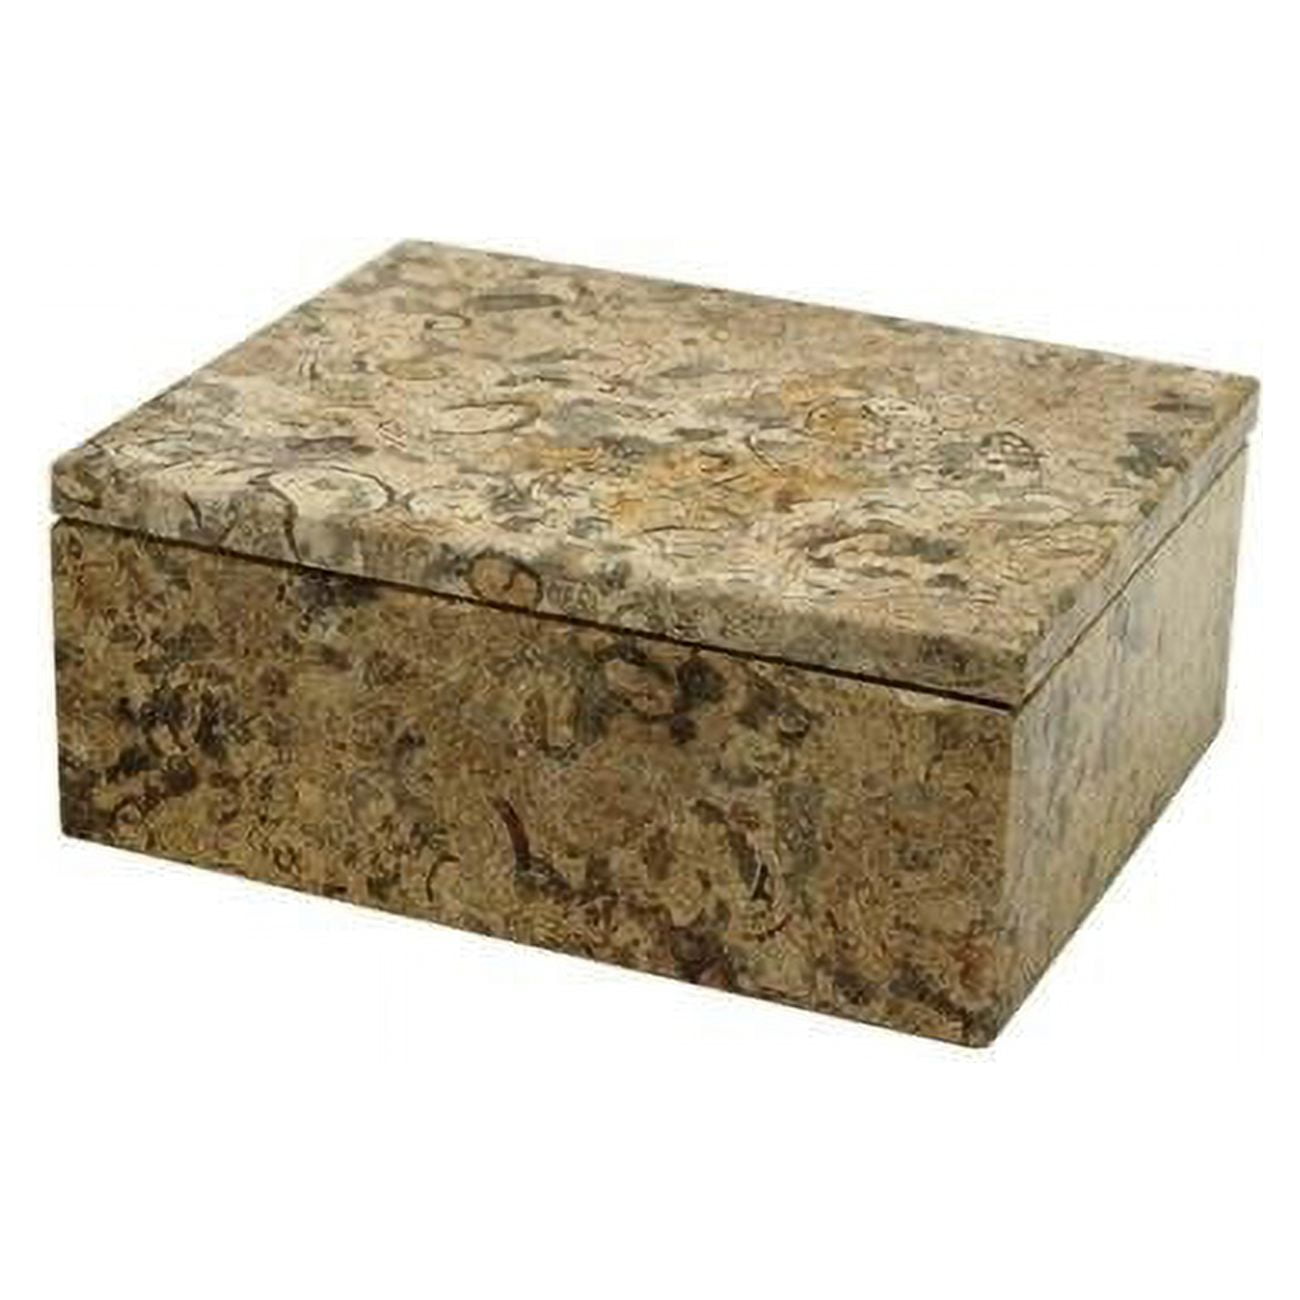 BX45-FS 5 in. Rectangular Asteria Keepsake Box, Fossil Stone -  Marble Crafter